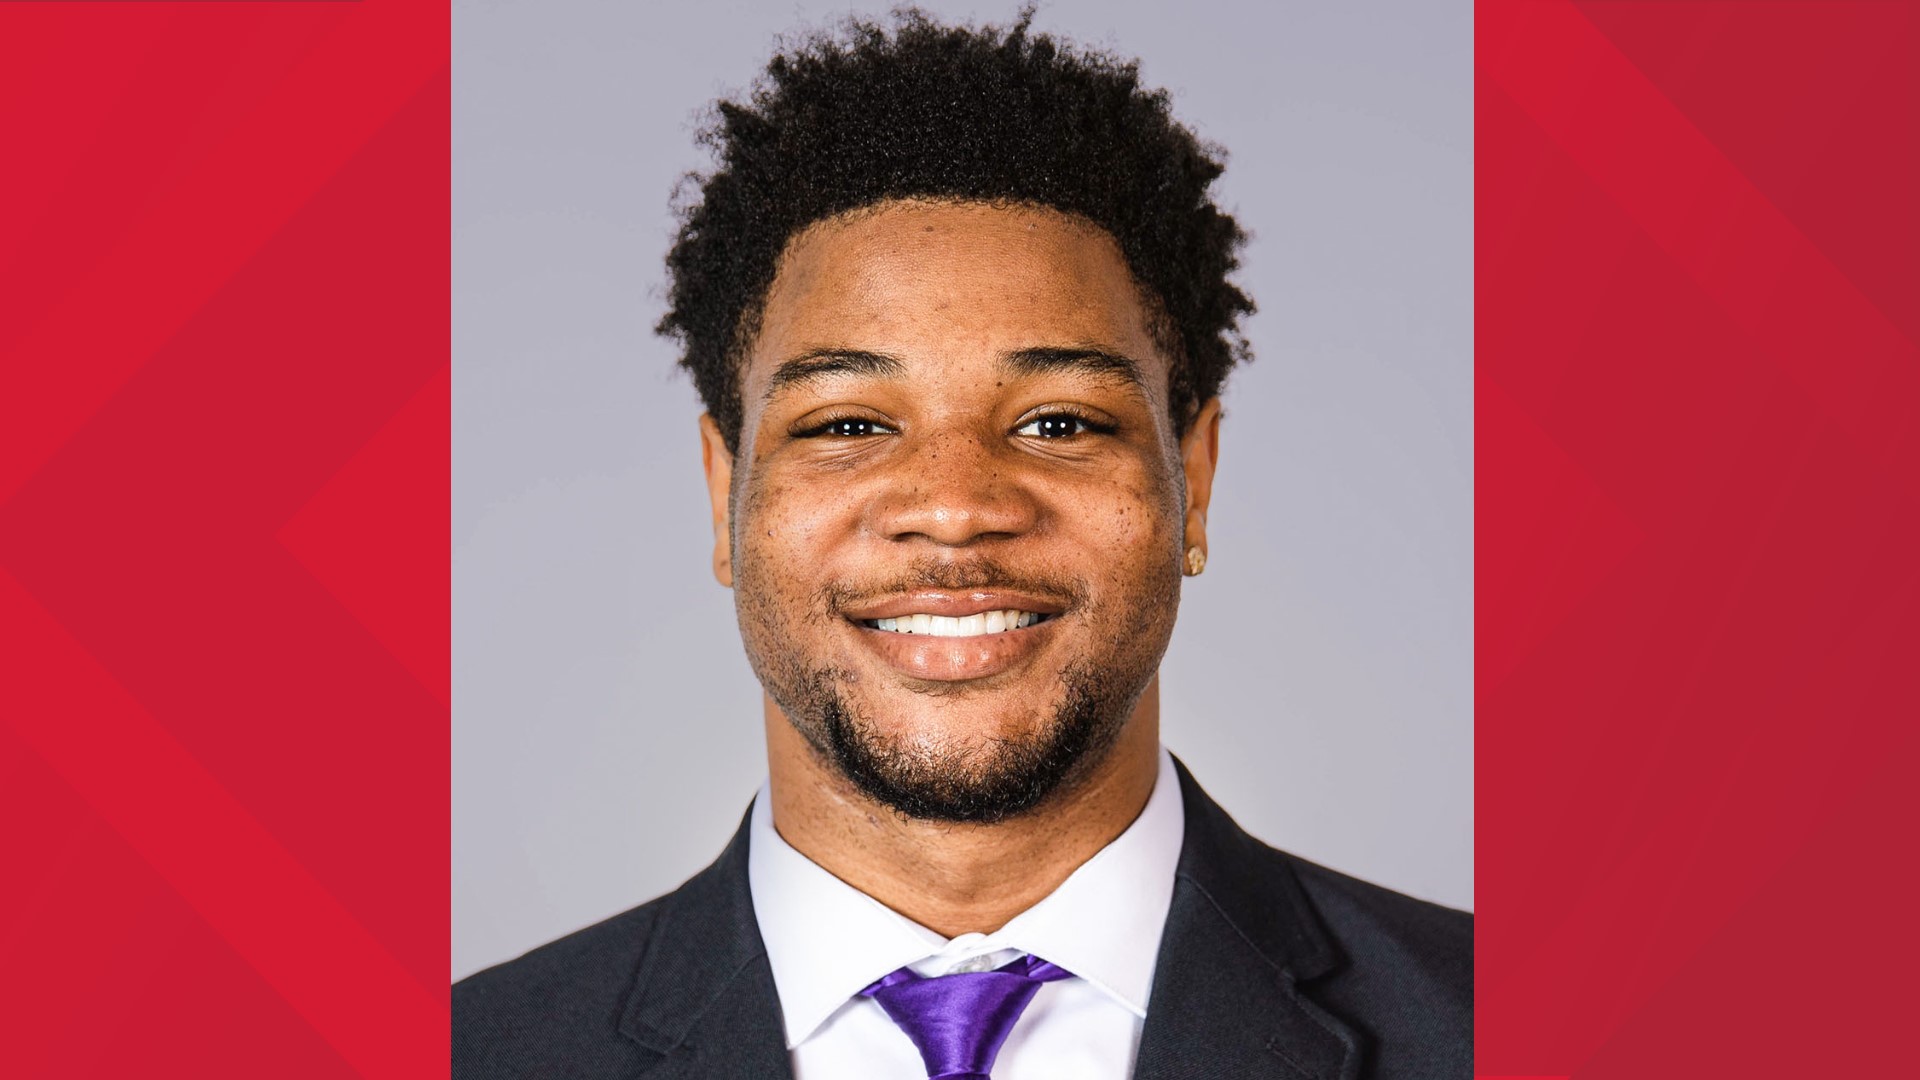 Tylin "Tybo" Rogers played in the Huskies' College Football Playoff games after the allegations, according to court documents.